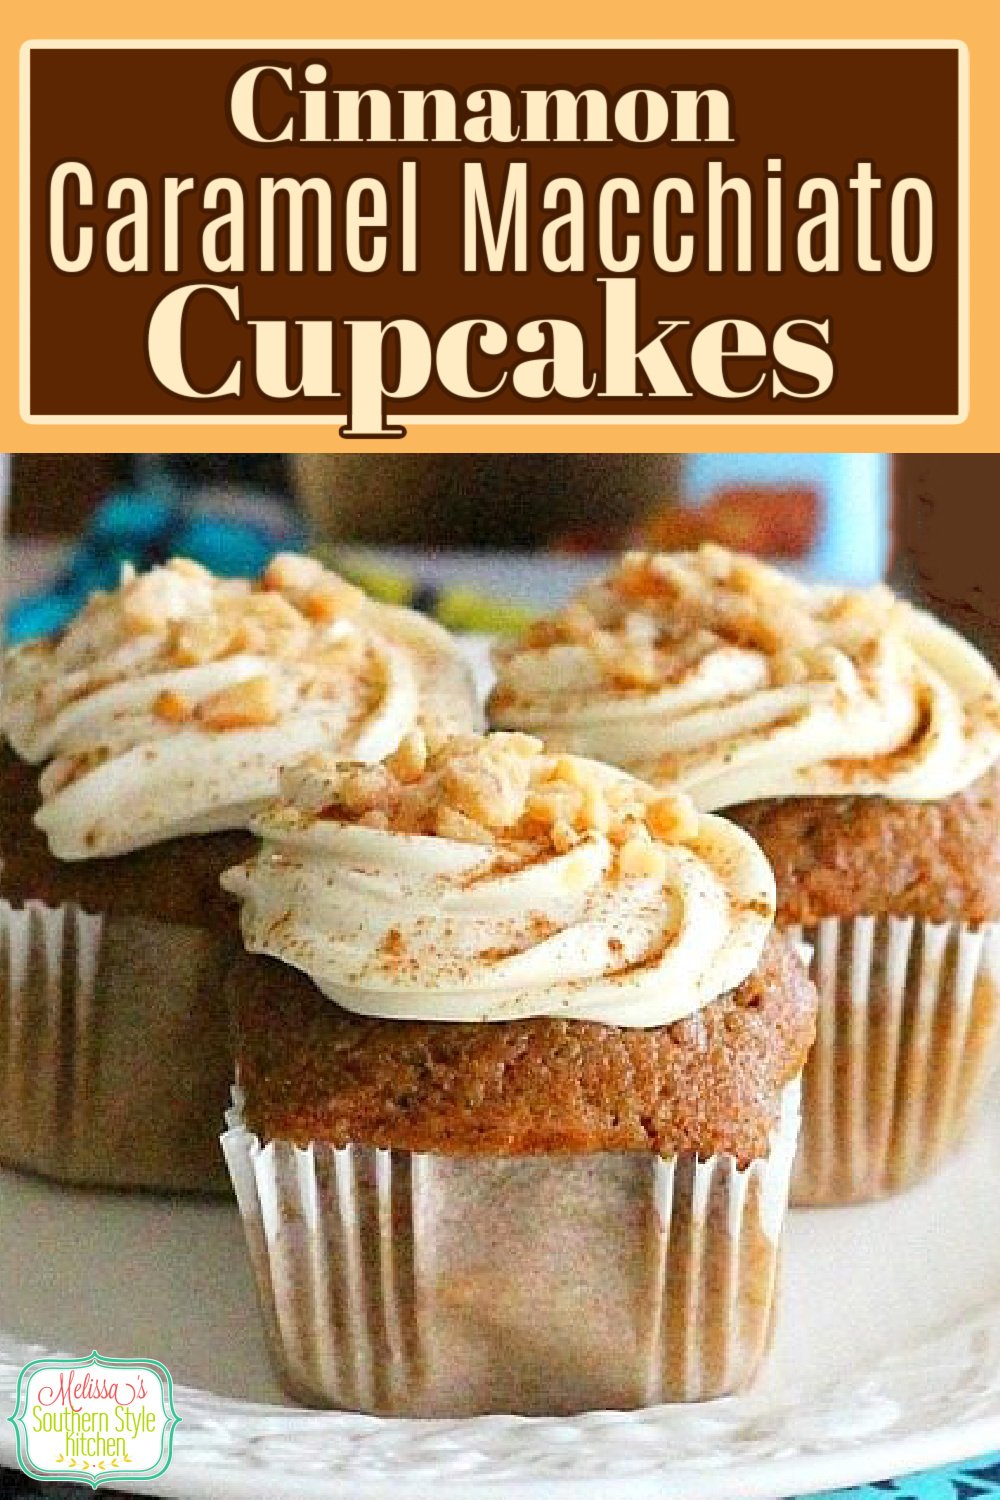 Start your day with these scrumptious Caramel Macchiato Cupcakes with cream cheese frosting #cupcakes #caramelmacchiato #coffeecake #muffins #muffinrecipes #caramel #cakes #desserts #brunch #breakfast #southernfood #southernrecipes via @melissasssk